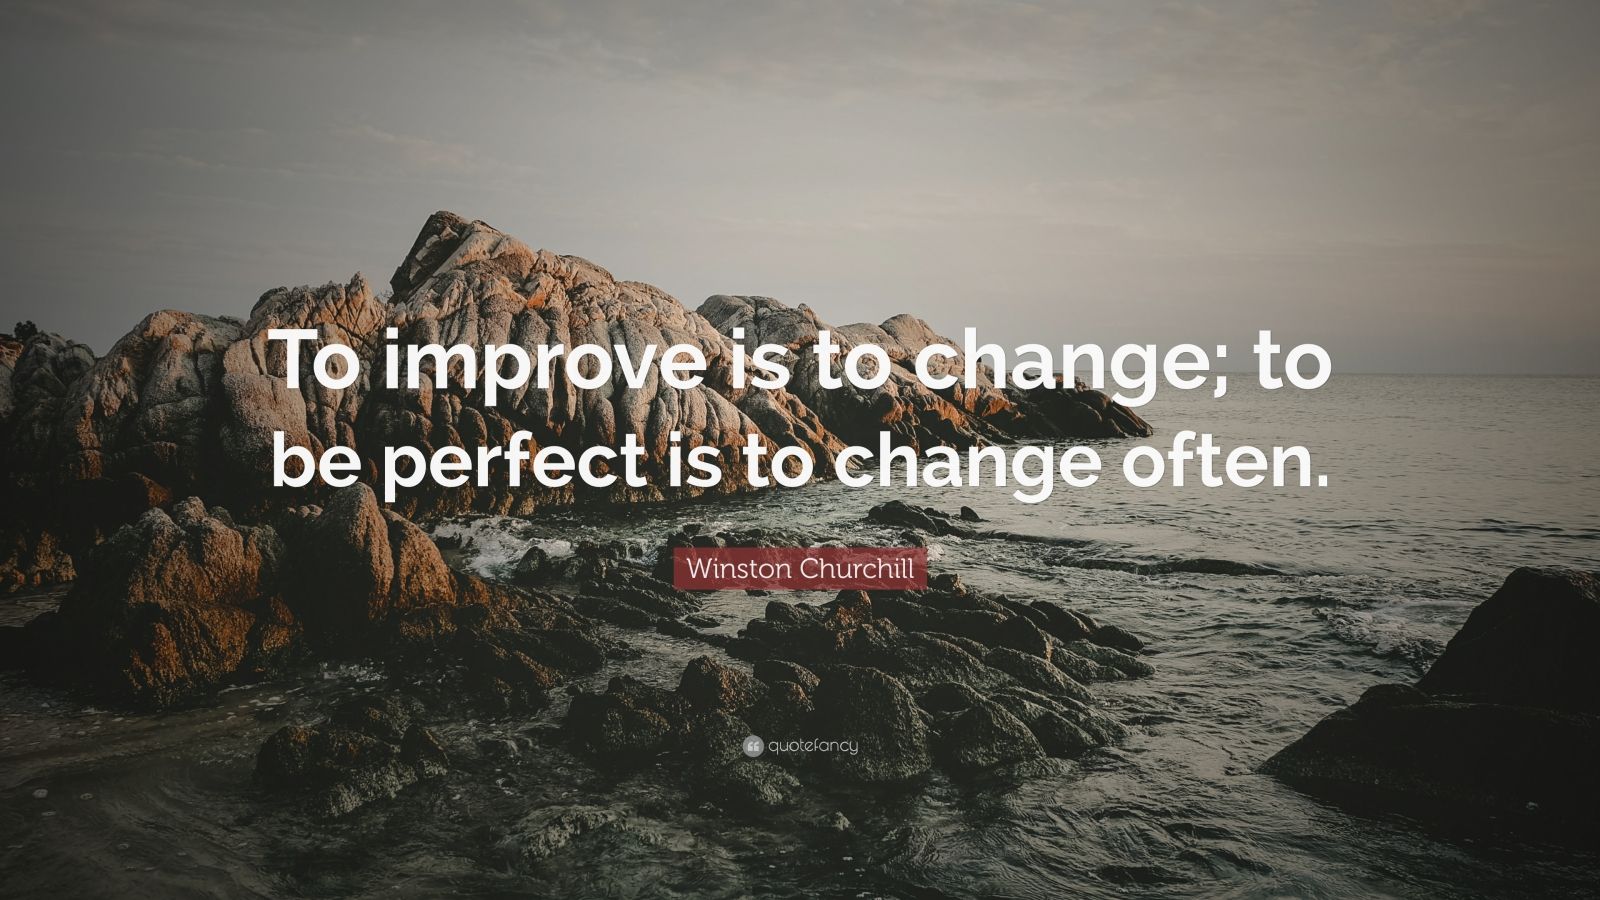 Winston Churchill Quote: “To improve is to change; to be perfect is to